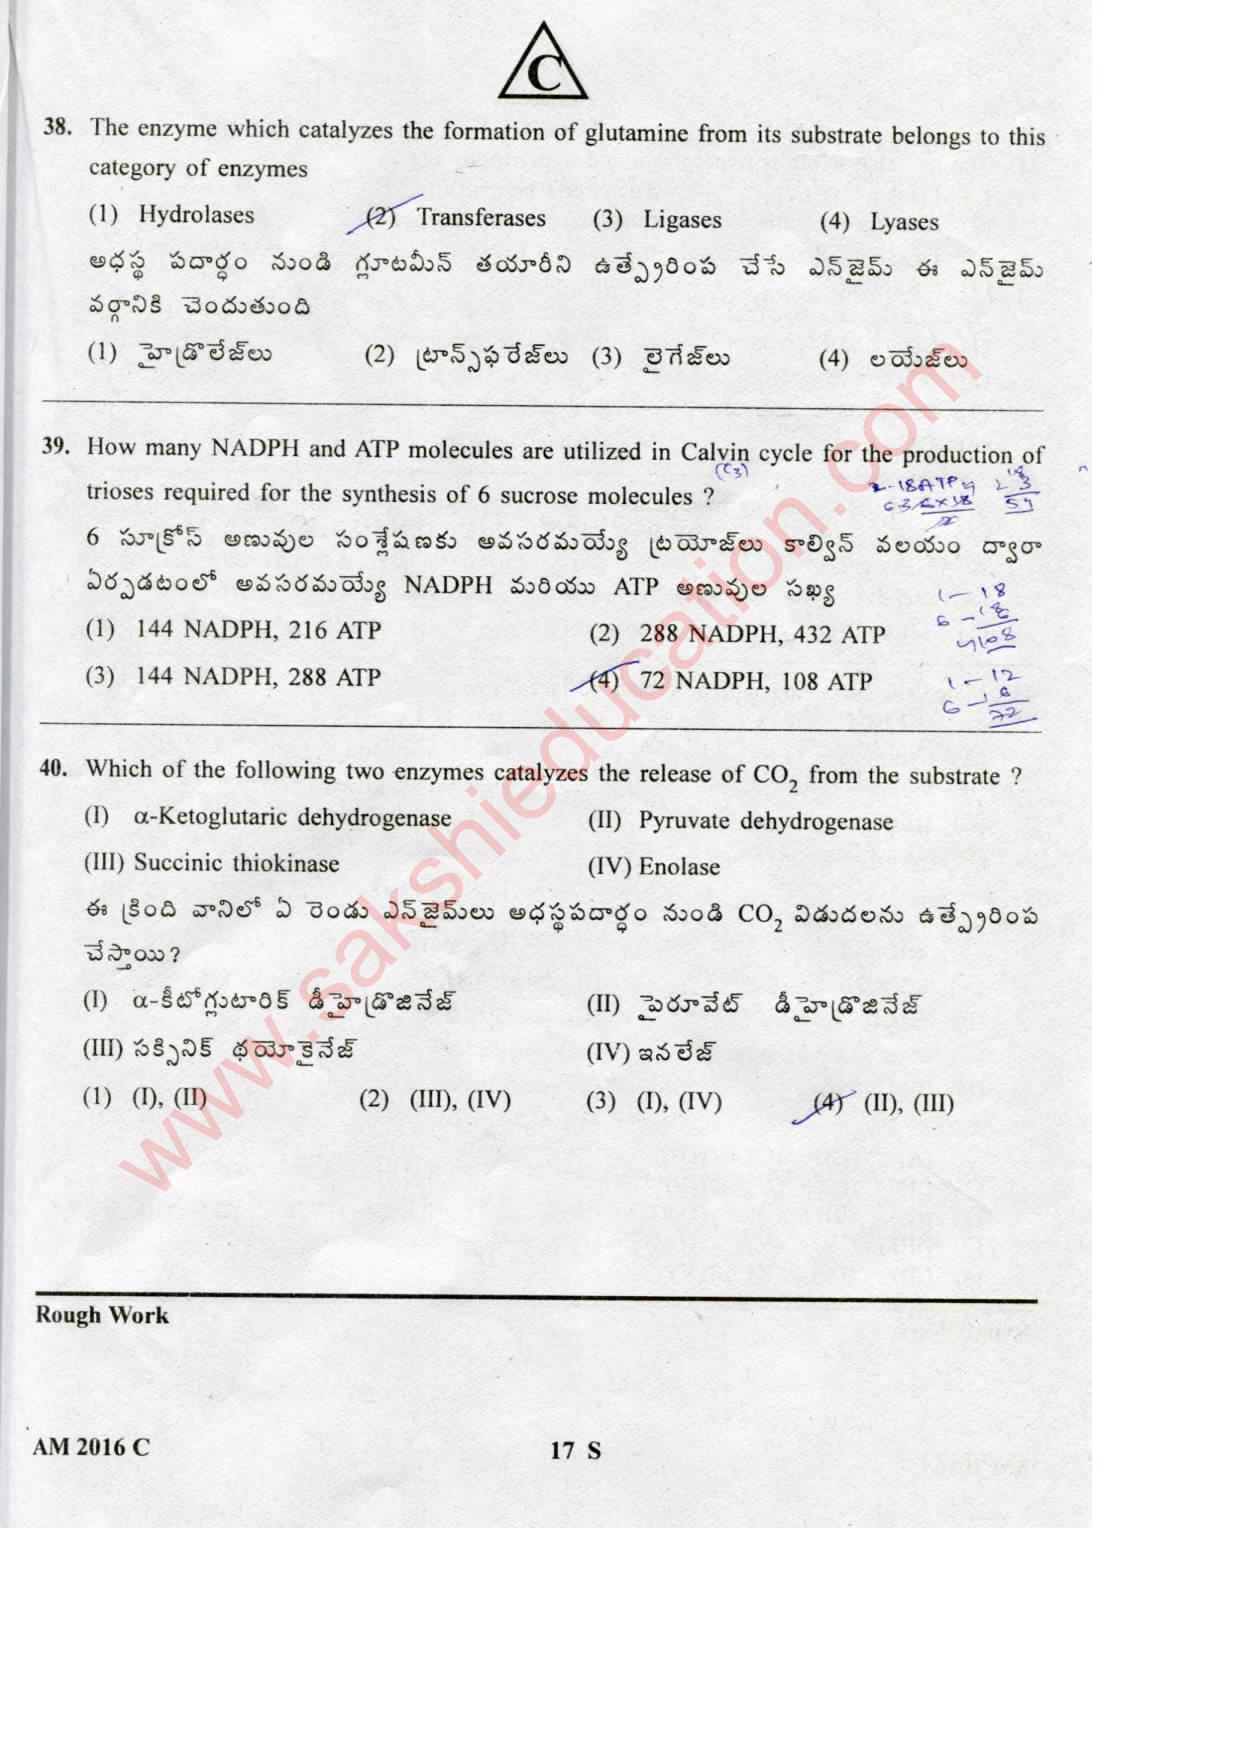 TS EAMCET 2016 Medical Question Paper with Key (Held on 15 May 2016) - Page 17